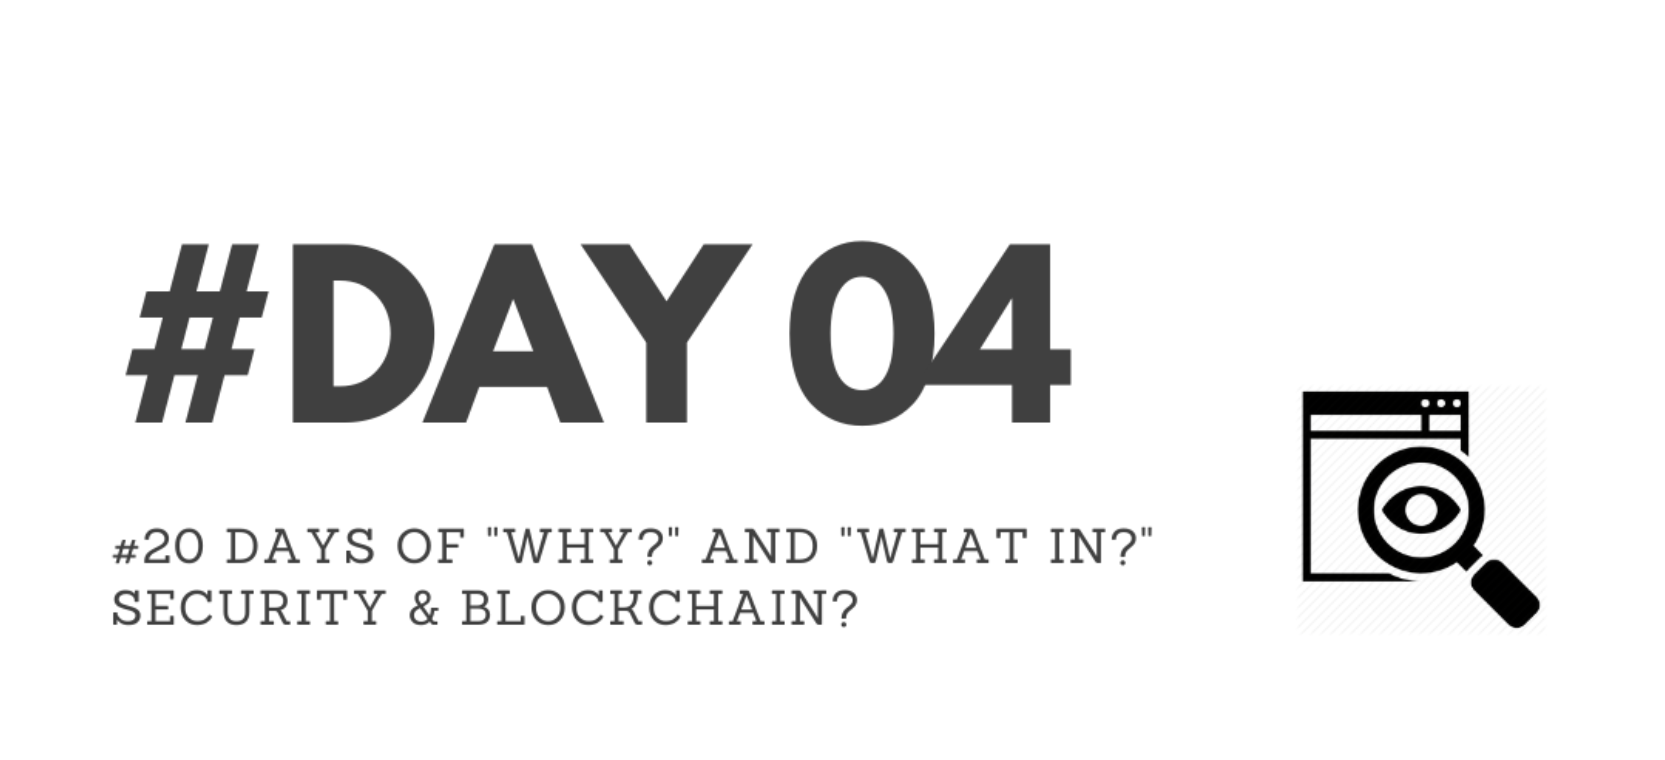 Day04 – “Why?” & “What in?” Security & Blockchain?